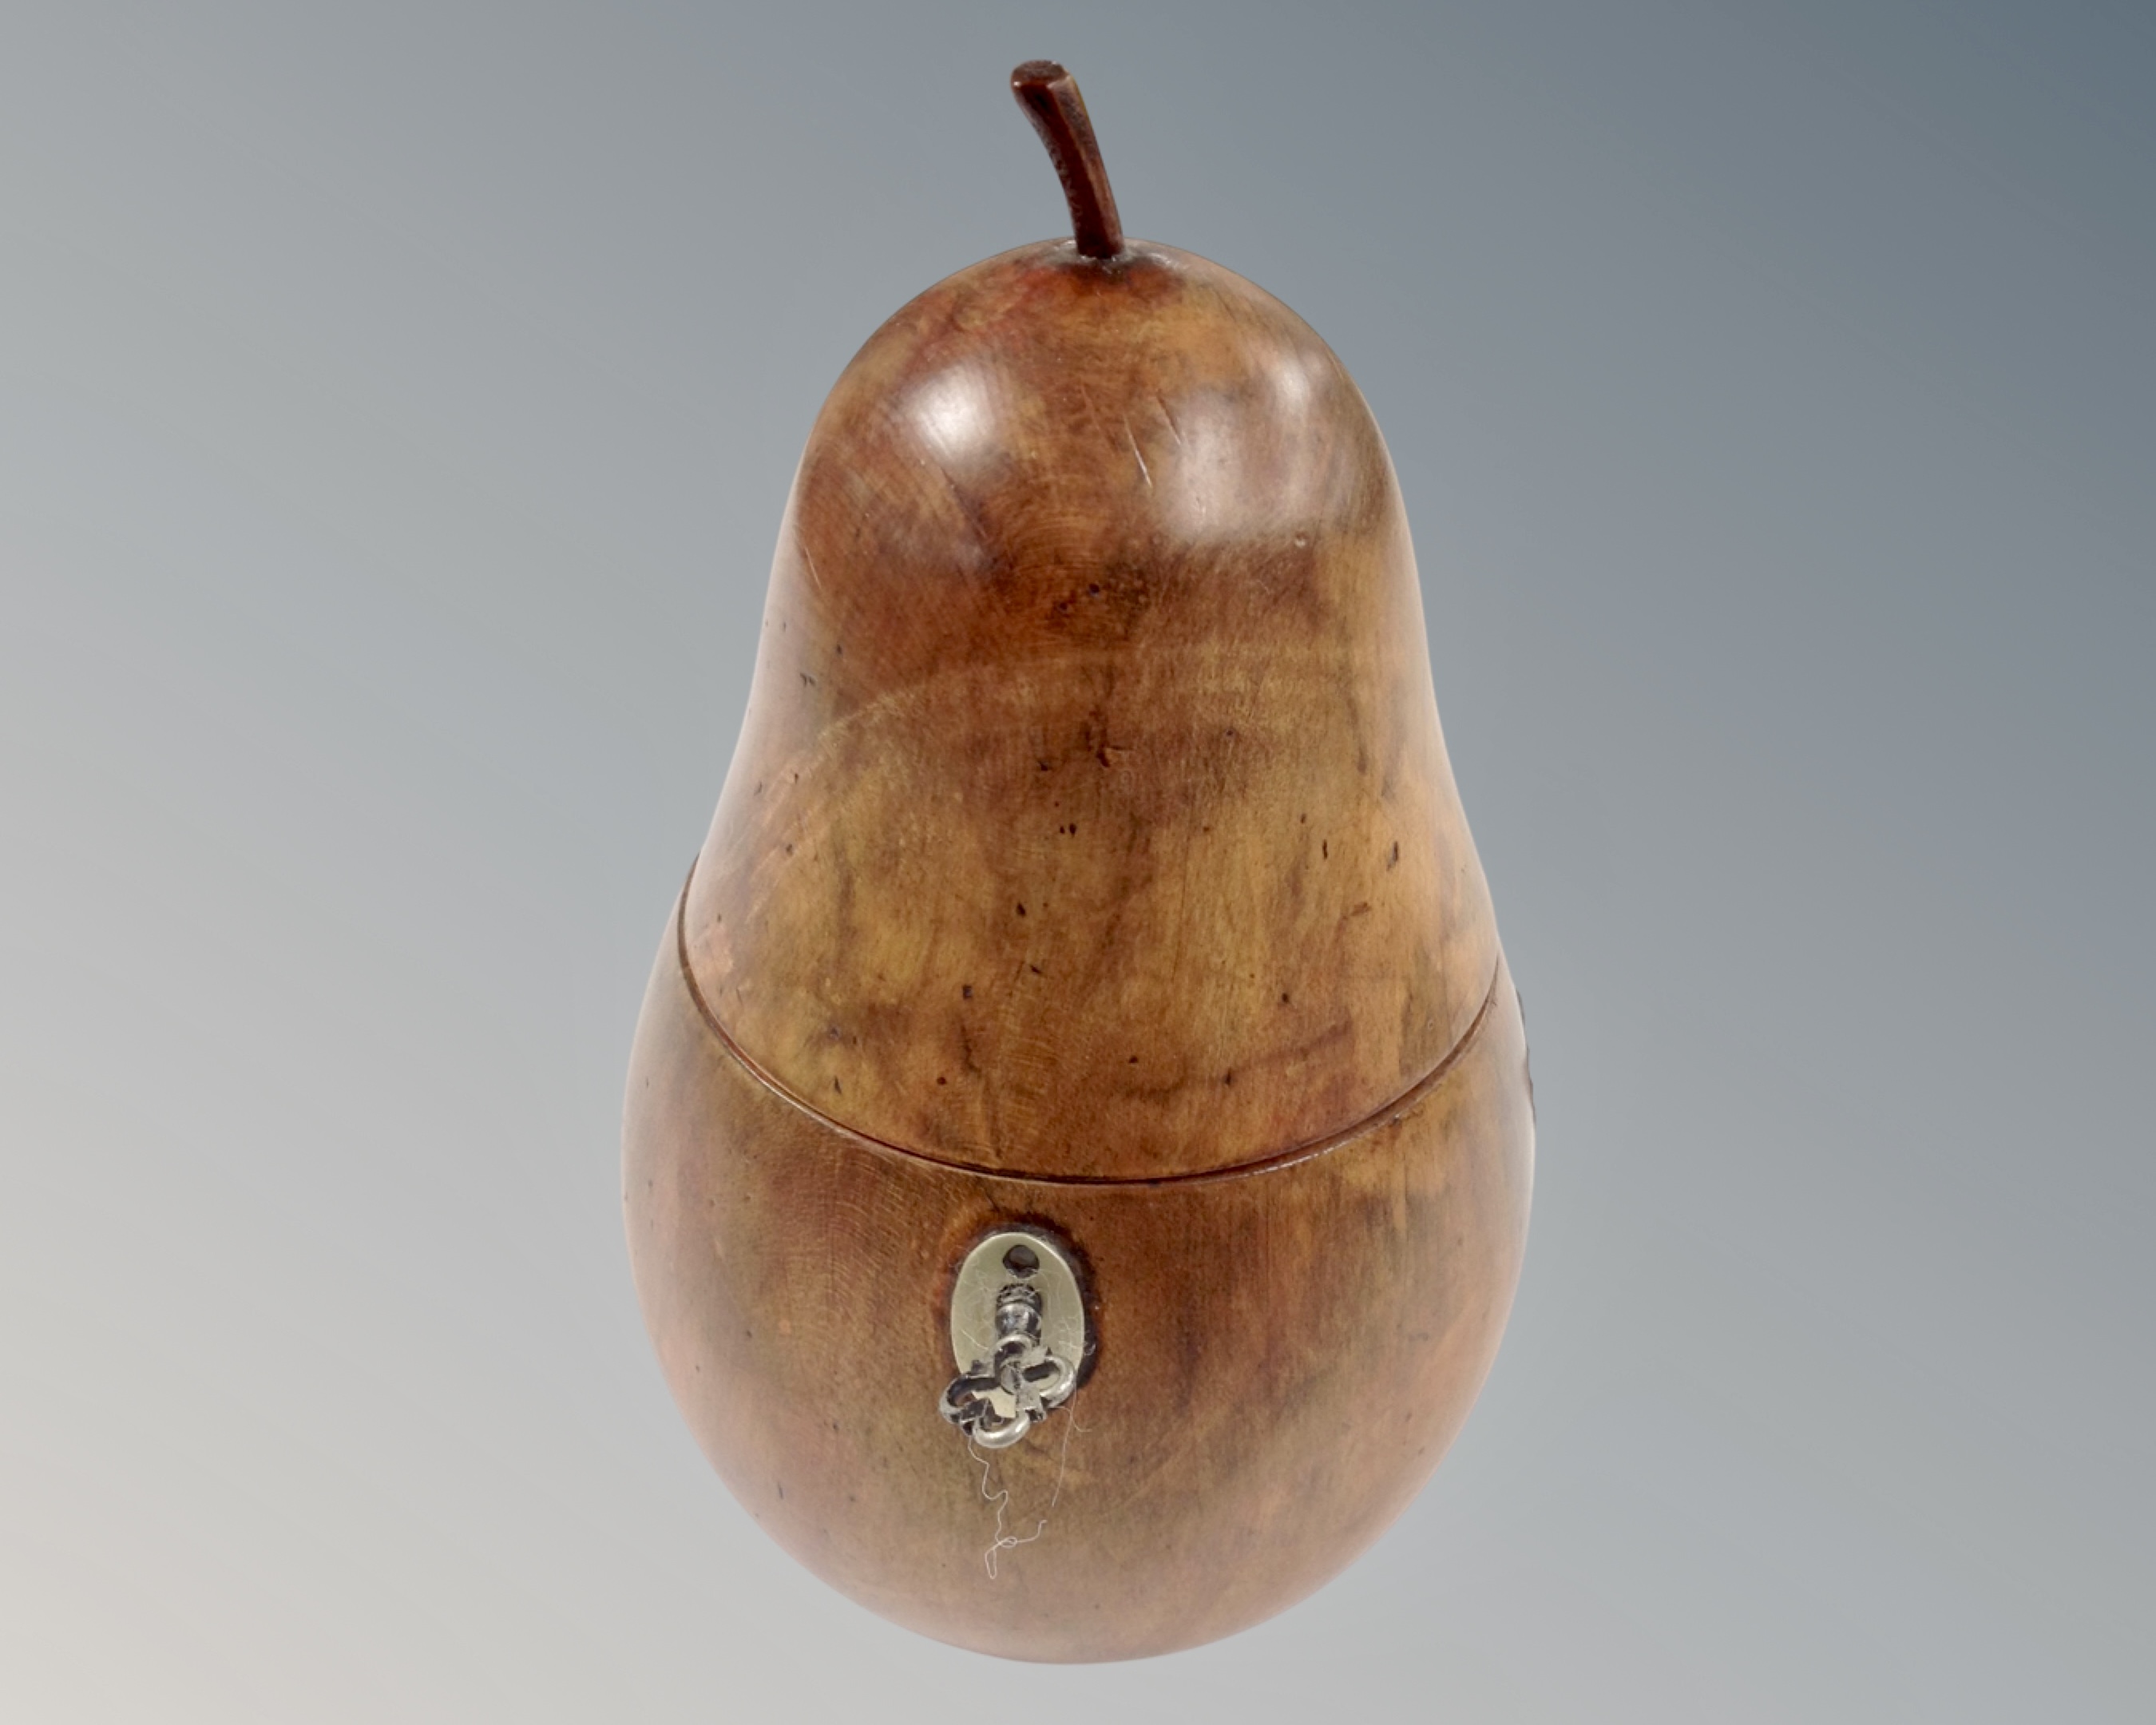 A George III style turned fruitwood tea caddy in the form of a pear.